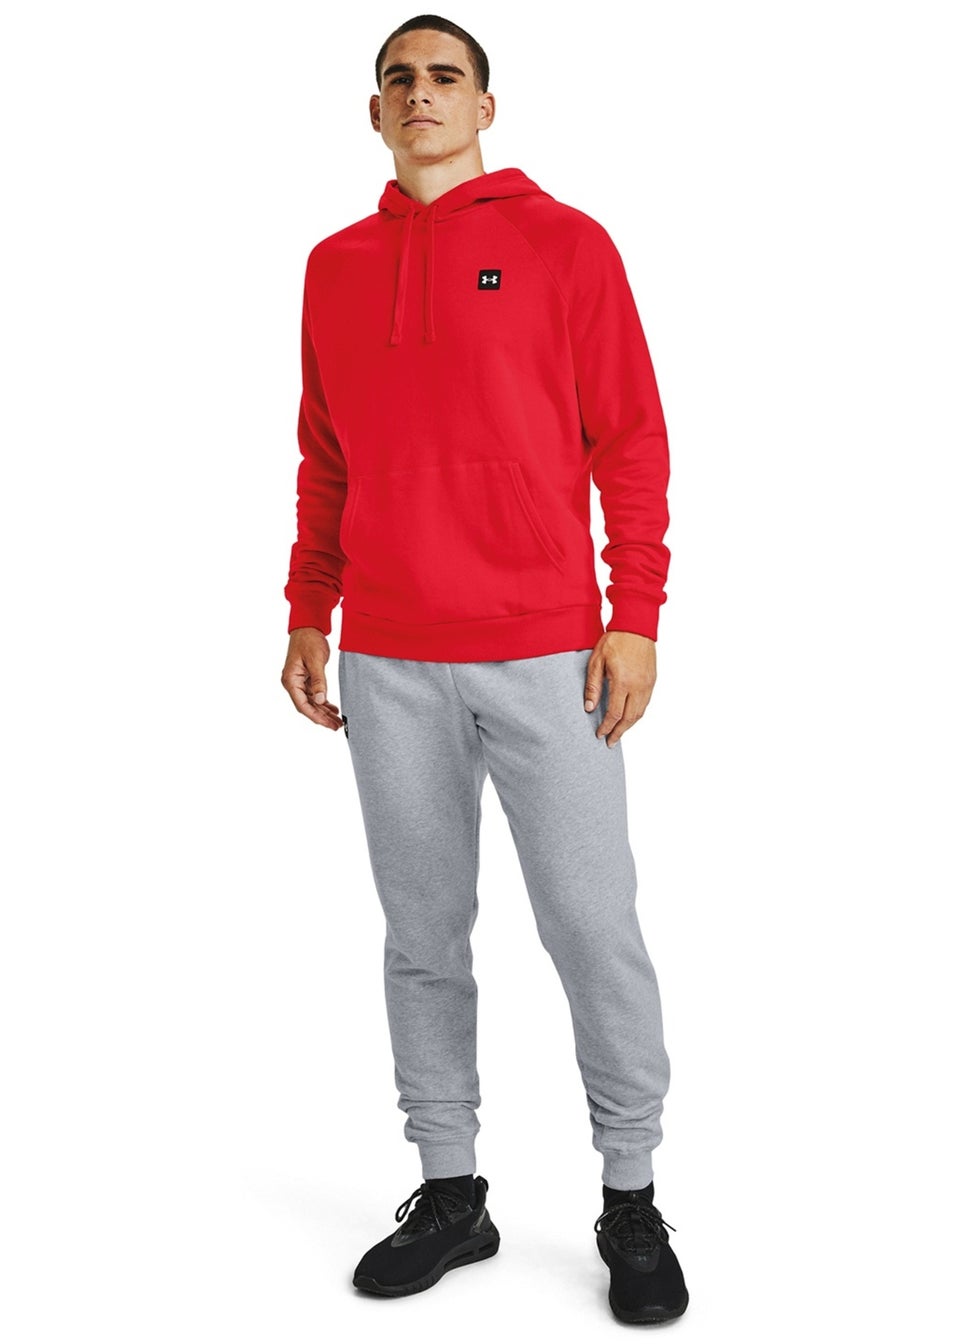 Under Armour Red Hoodie